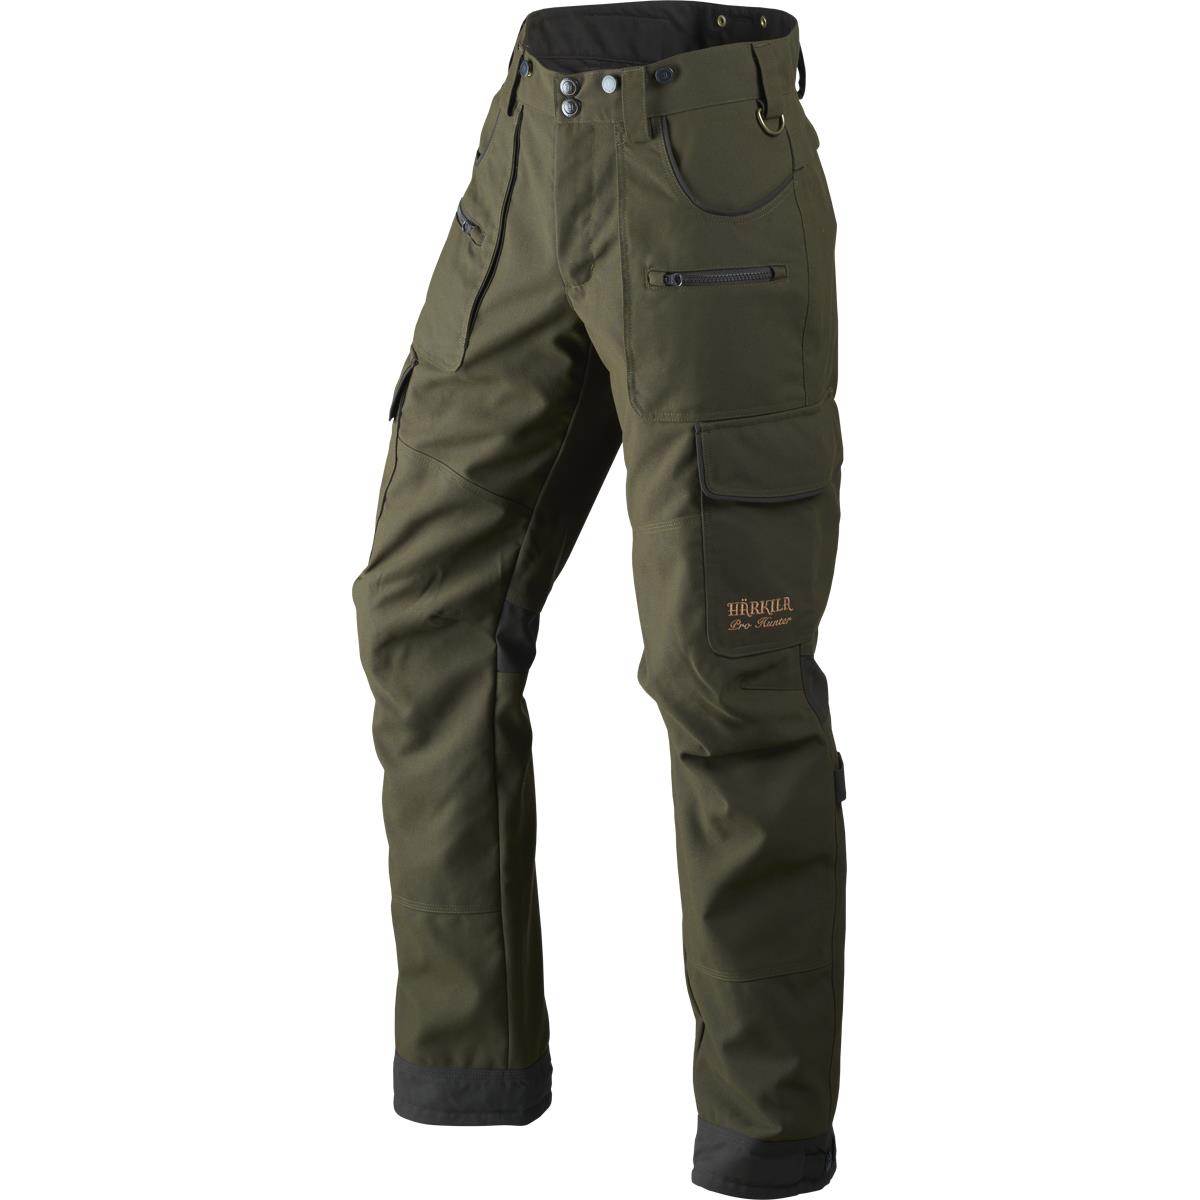 What sets apart the Harkila Pro Hunter trousers?